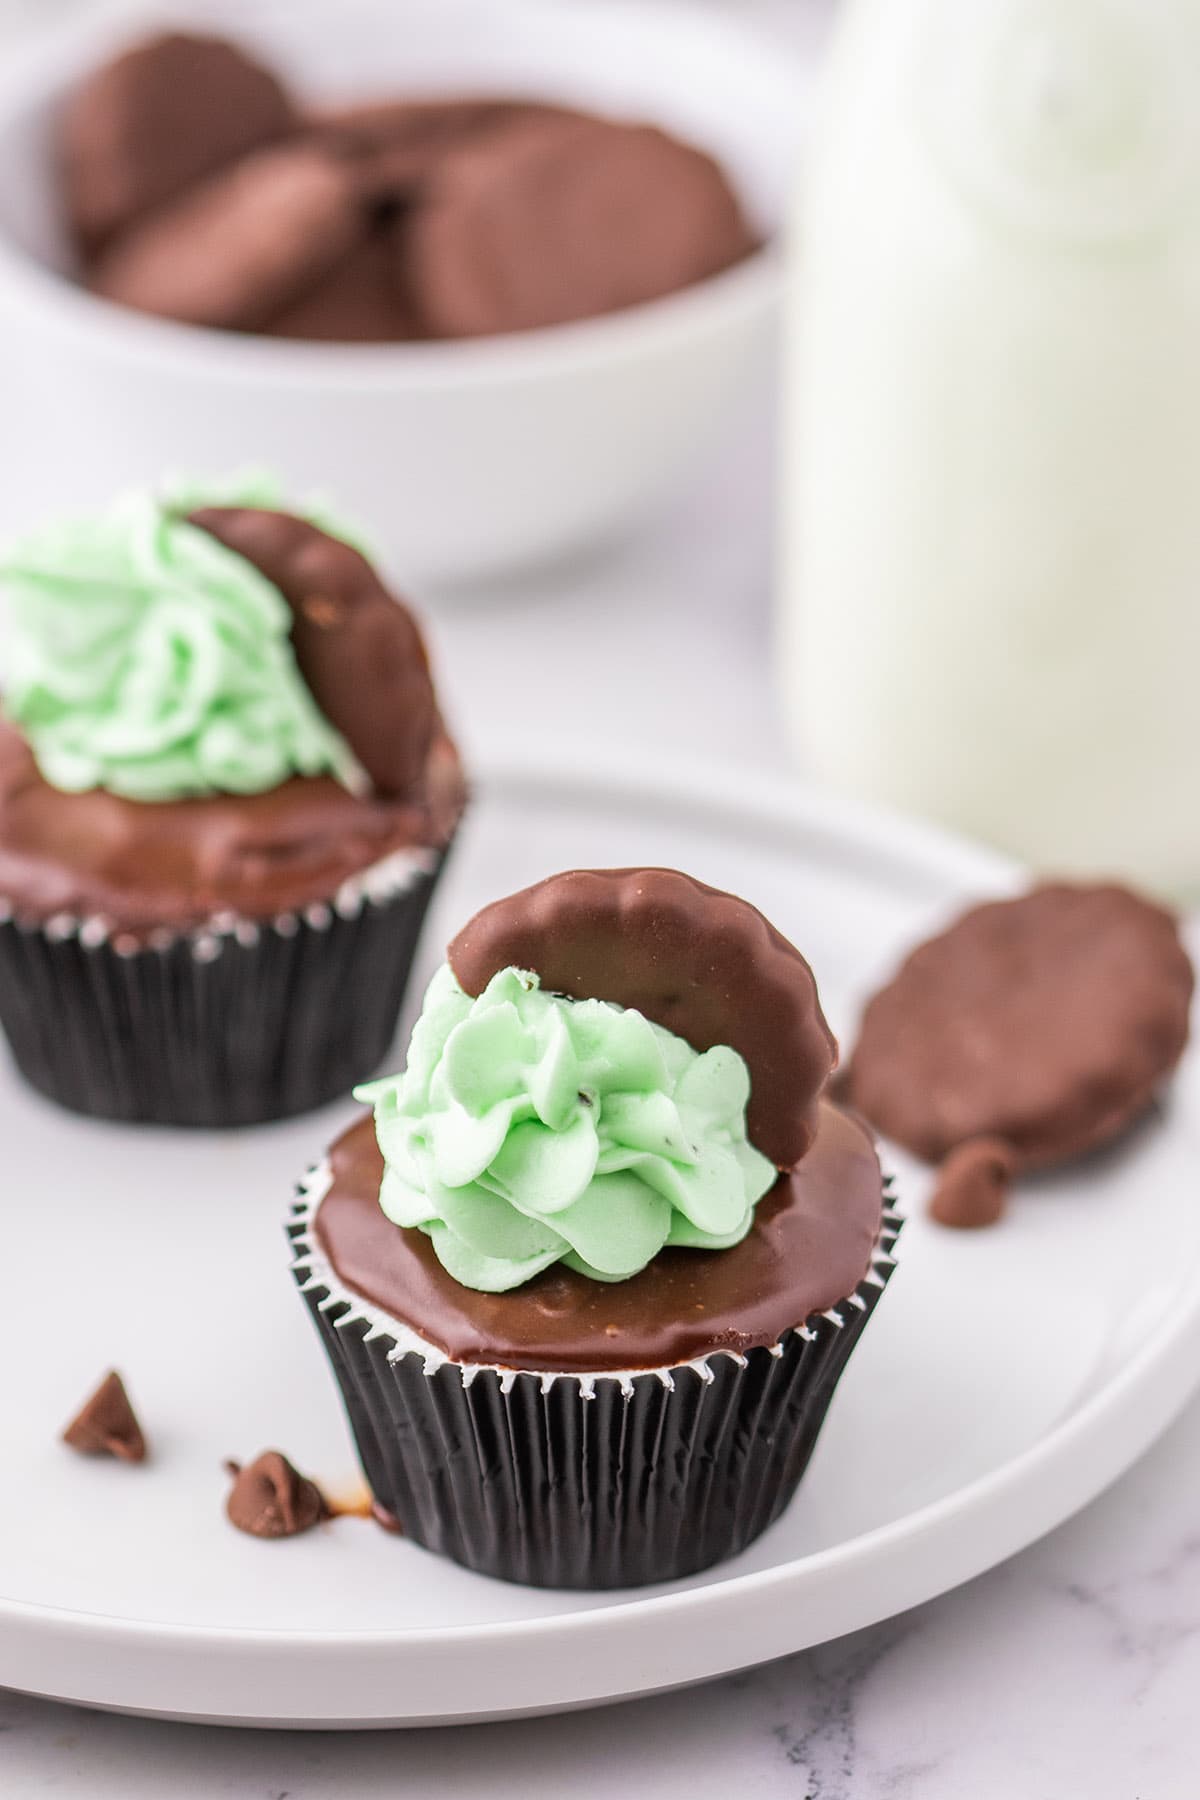 2 Thin Mint Cupcakes on a white plate.